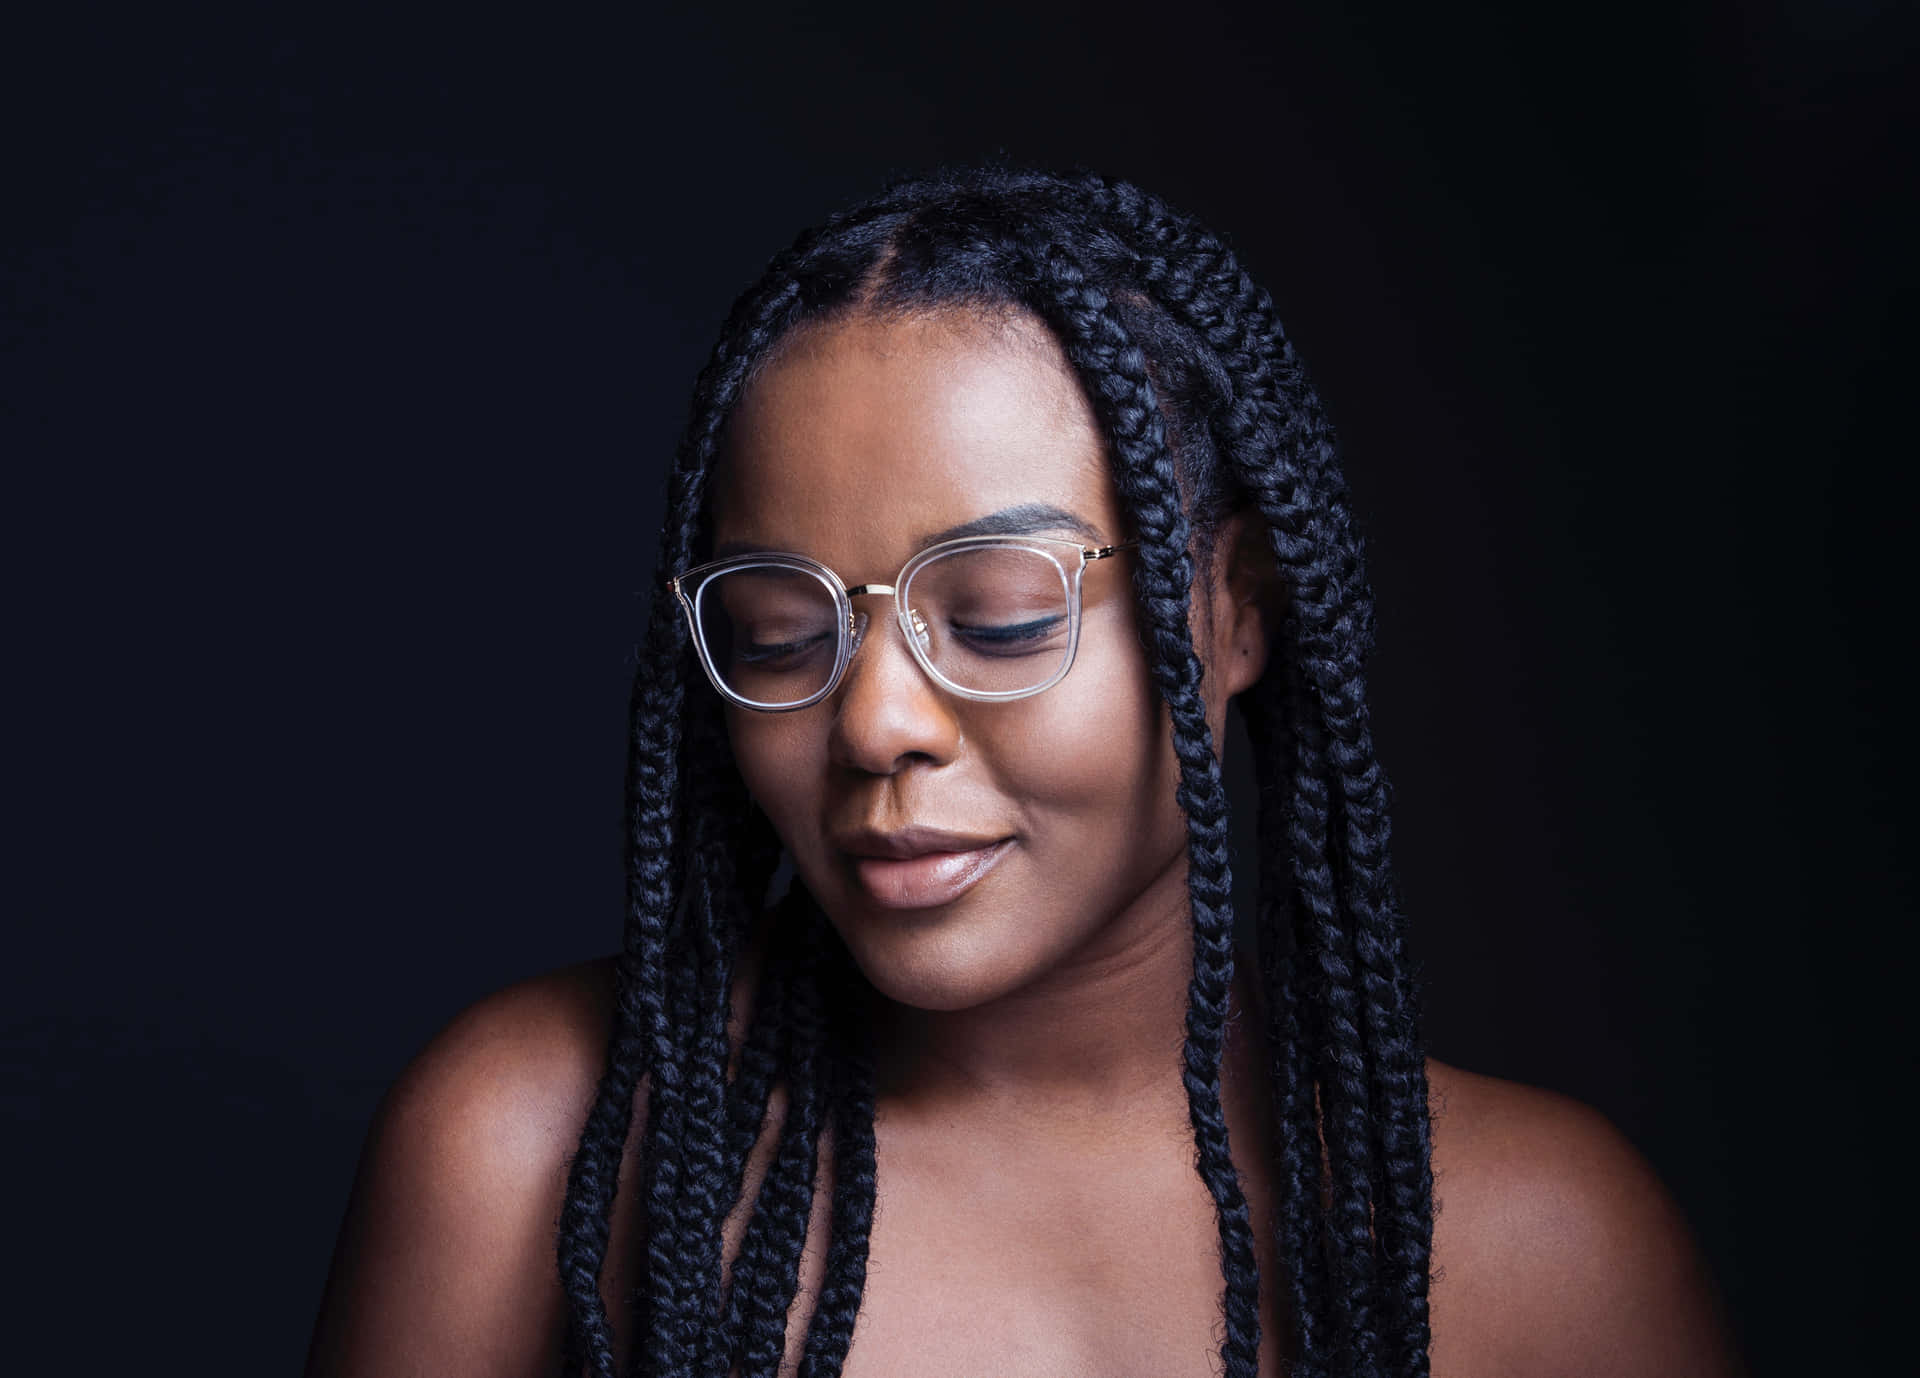 A Young Woman With Braids And Glasses